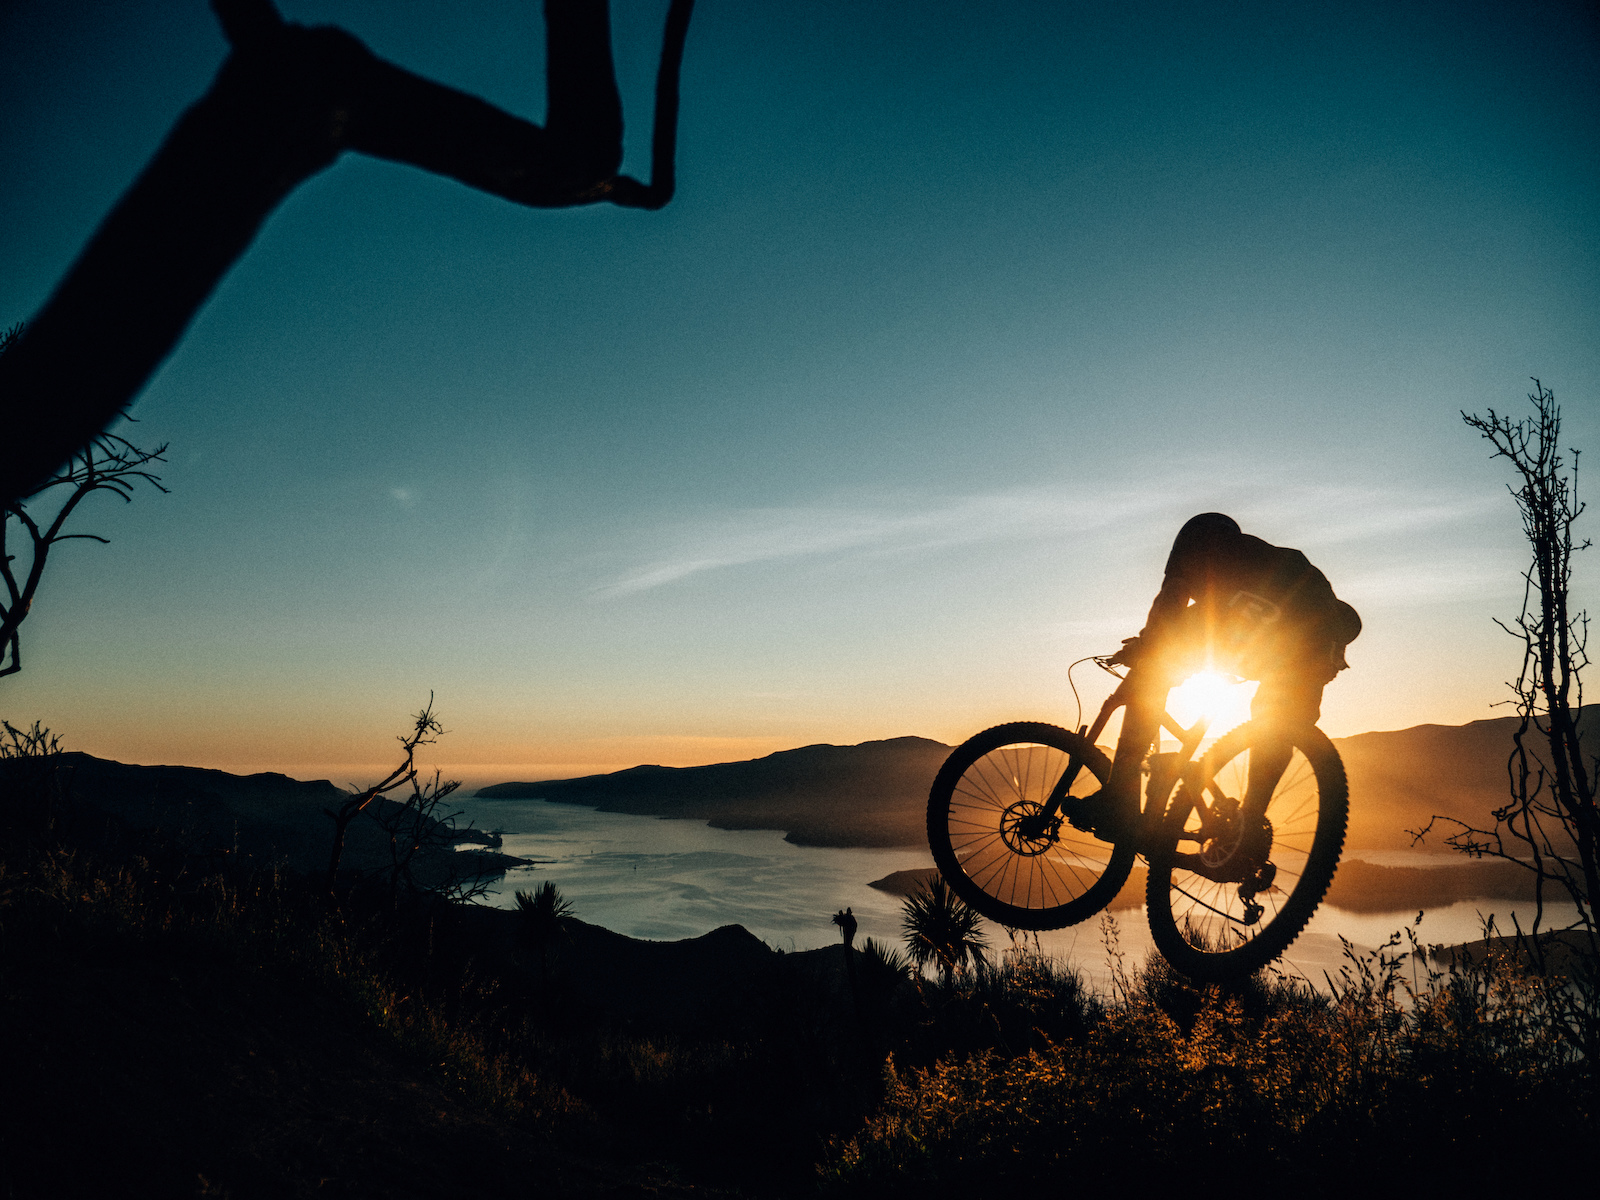 Ben catching the first light while shooting for our upcoming film - THE GC - http://www.theperfectline.co.nz/canterbury-mountain-bike-film/